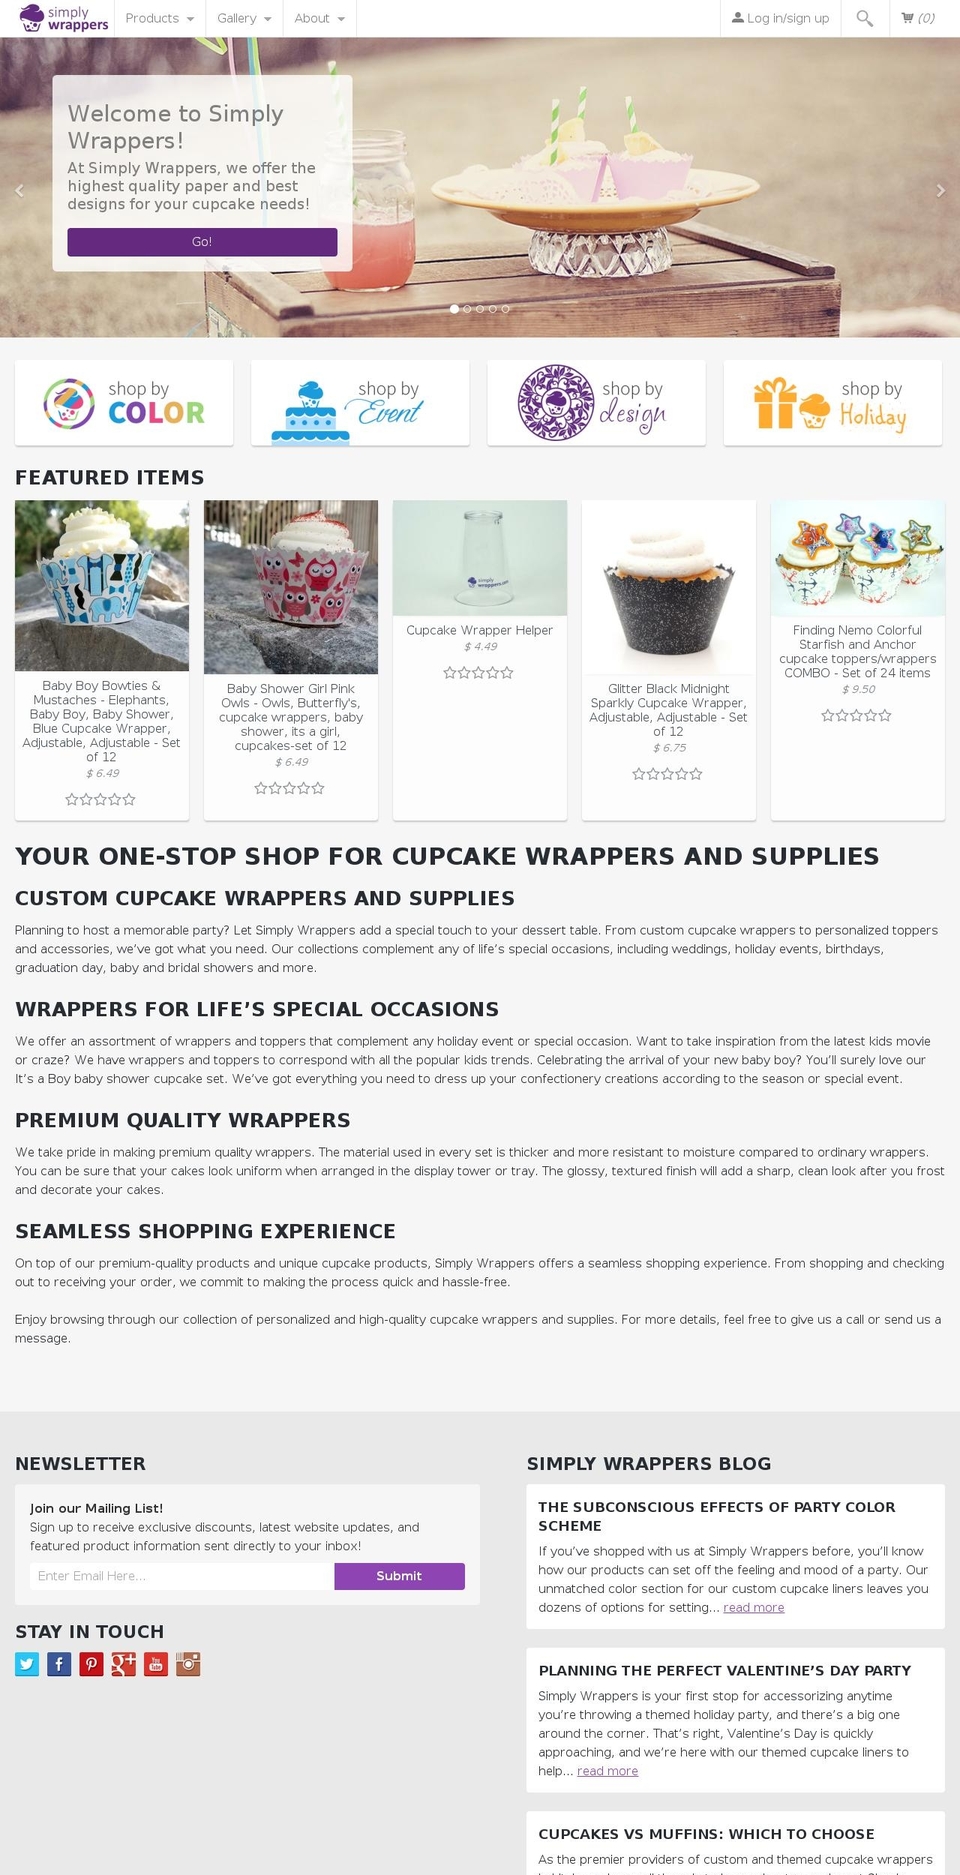 Fluid Shopify theme site example simplywrappers.com